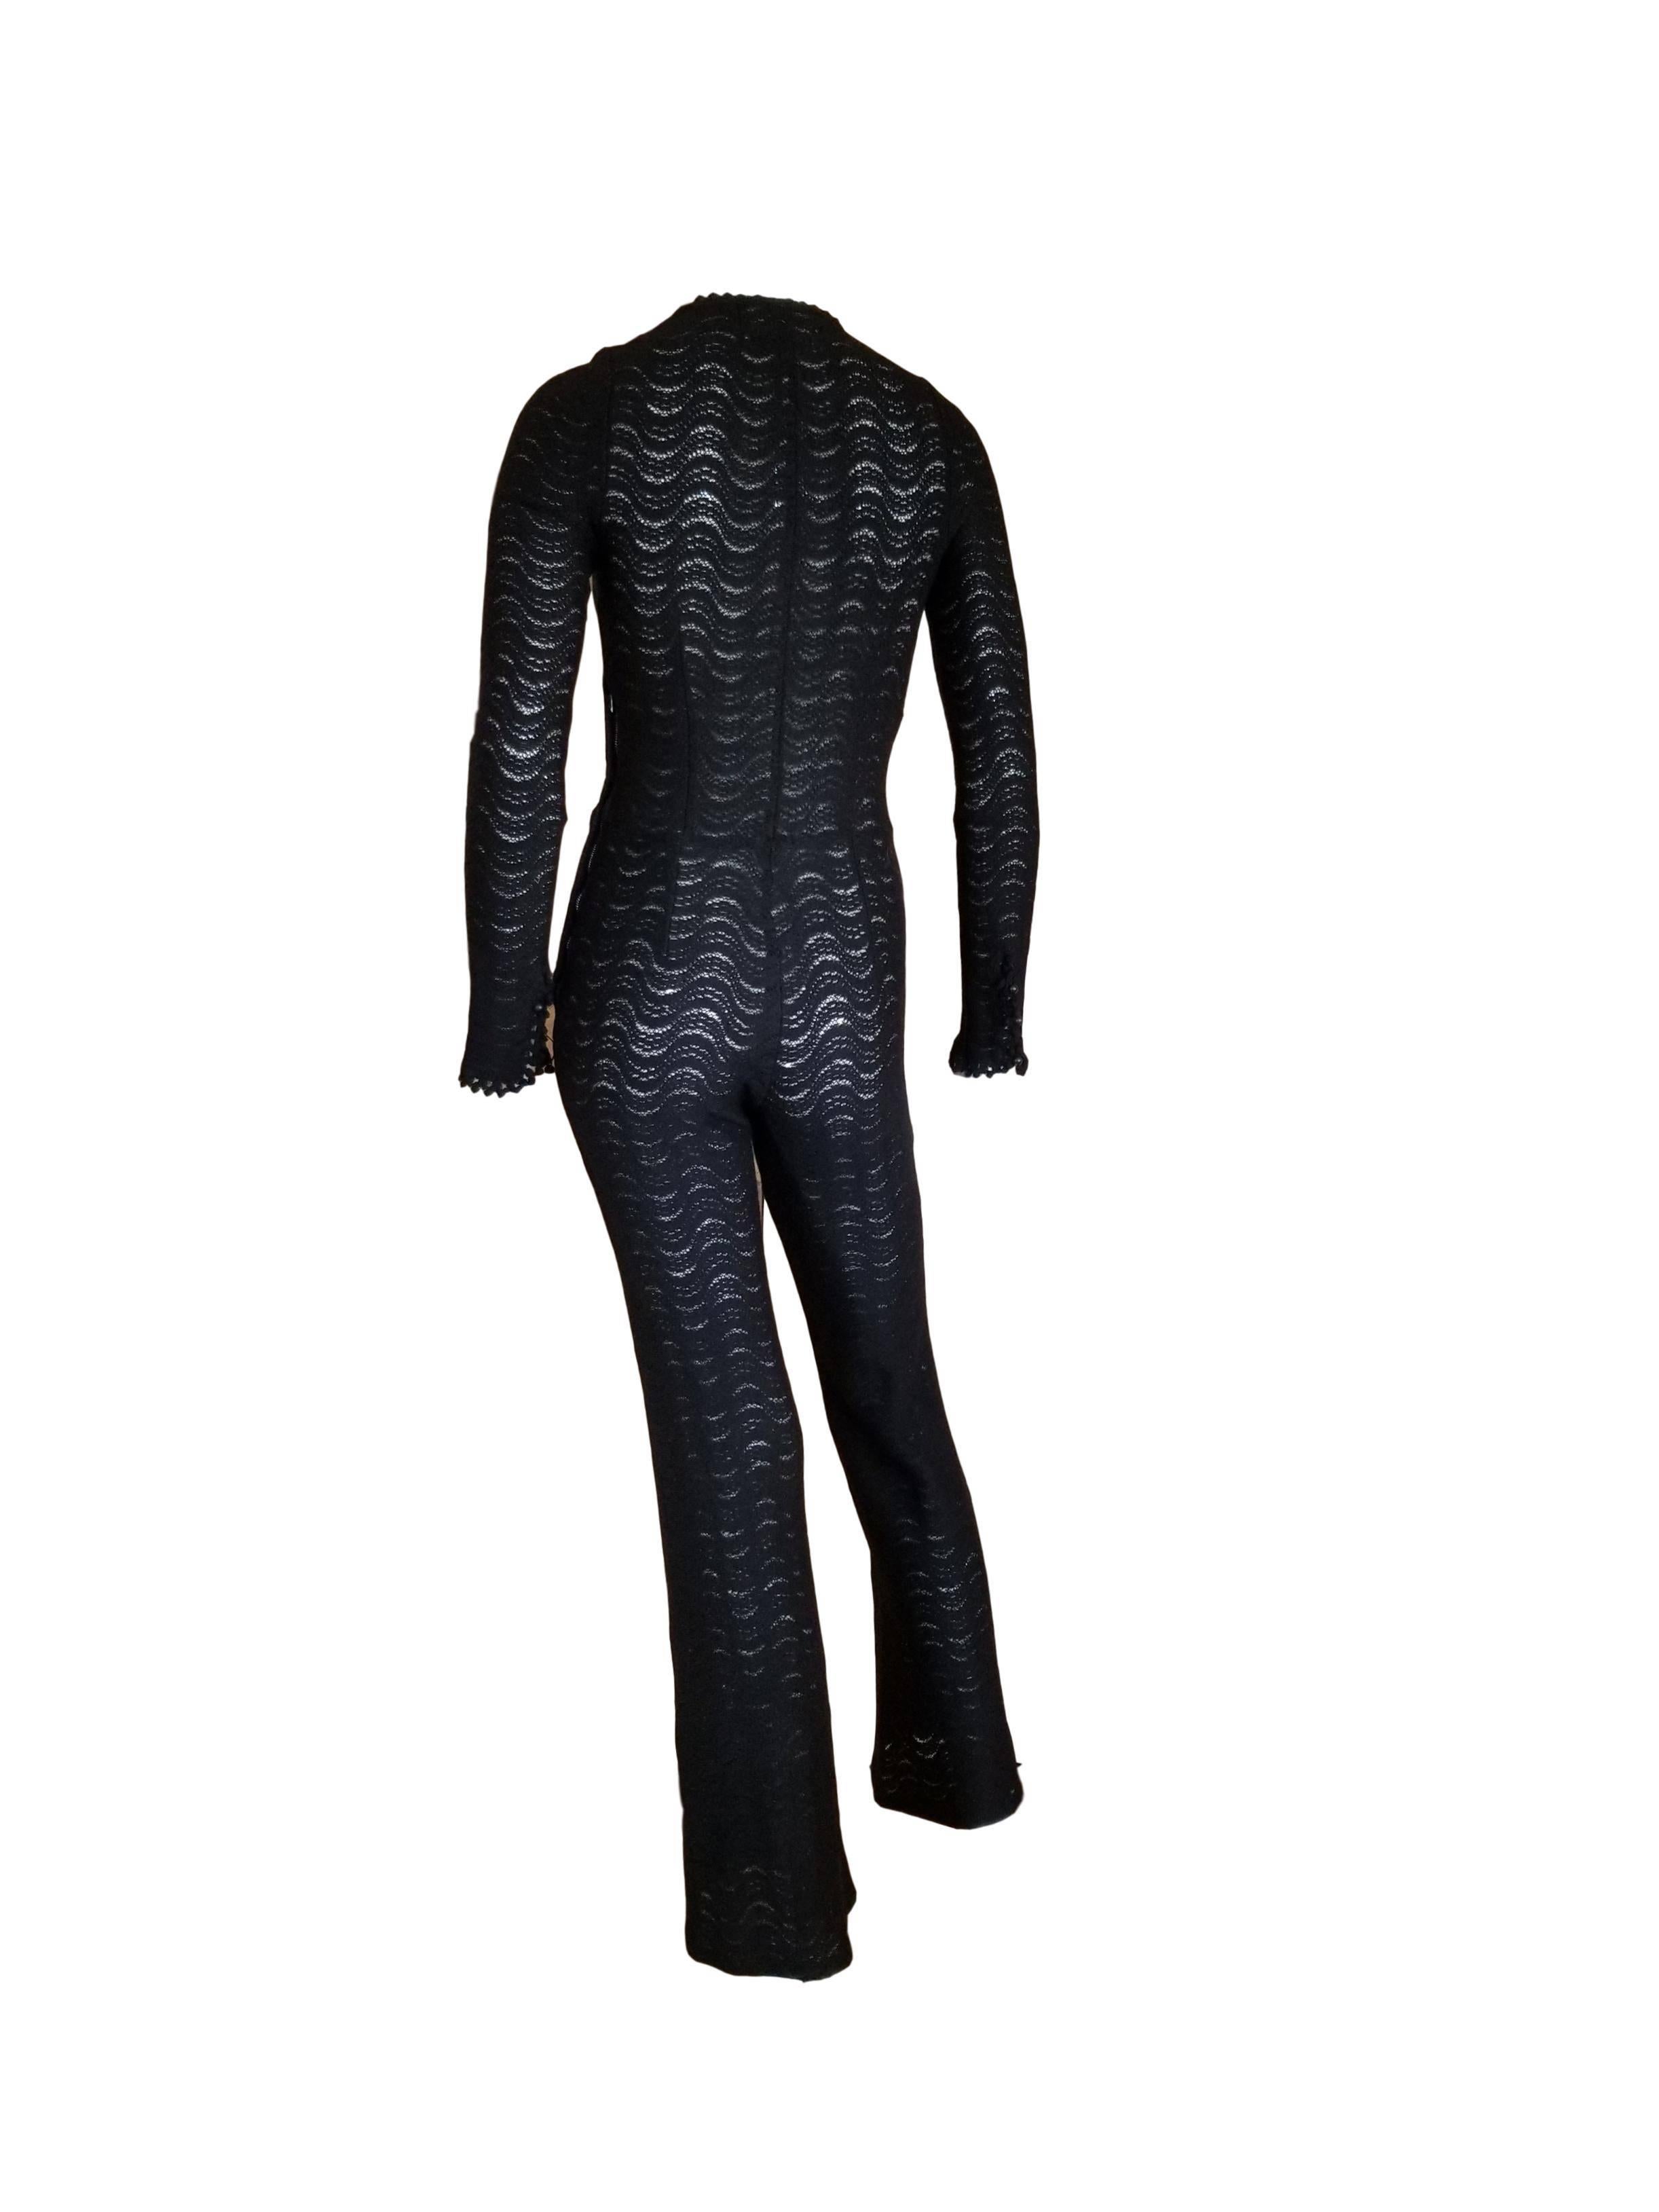 Late 1960s Biba Crochet Jumpsuit. So sexy with button front and side Metal zip fastening.  Bootcut leg and skin tight all over the rest. 
Excellent condition with a couple of minor breaks to crochet. A little stretching on a couple of the button